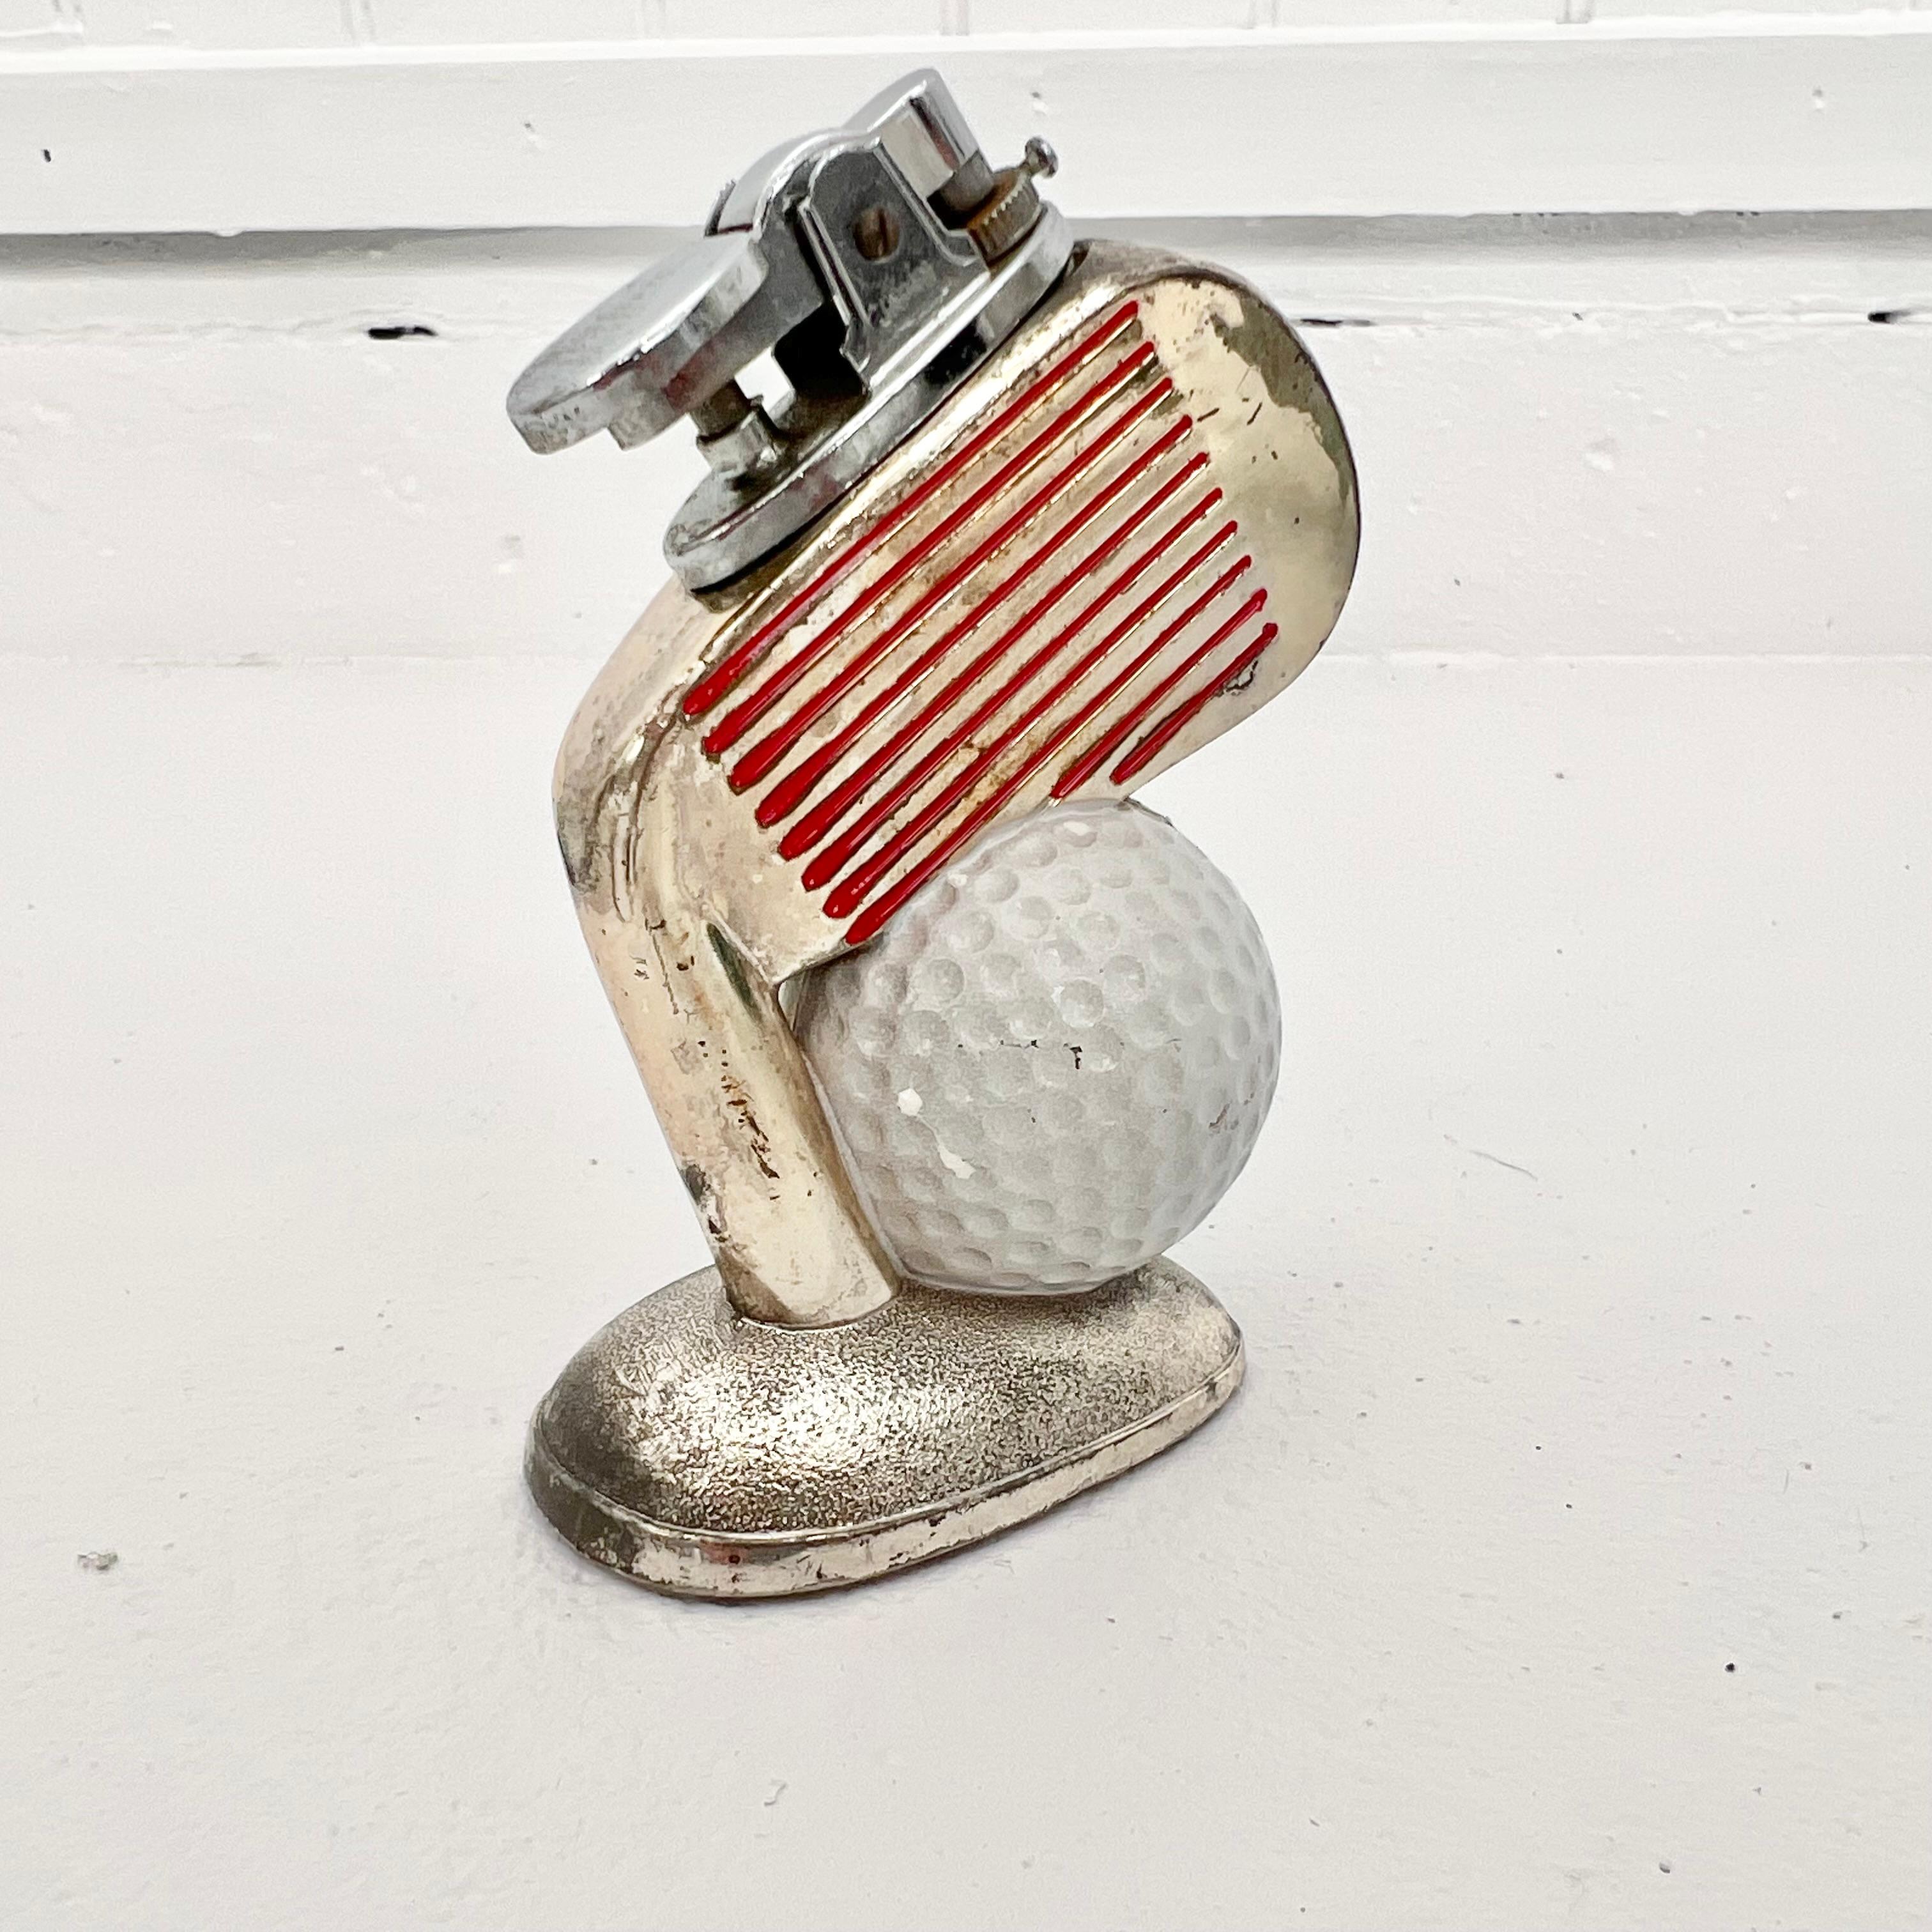 Unique 1960s Golf club/ball lighter made in Japan. Works perfectly and in good condition. A great gift for any golf aficionado. Sold out of Comoy's of London.